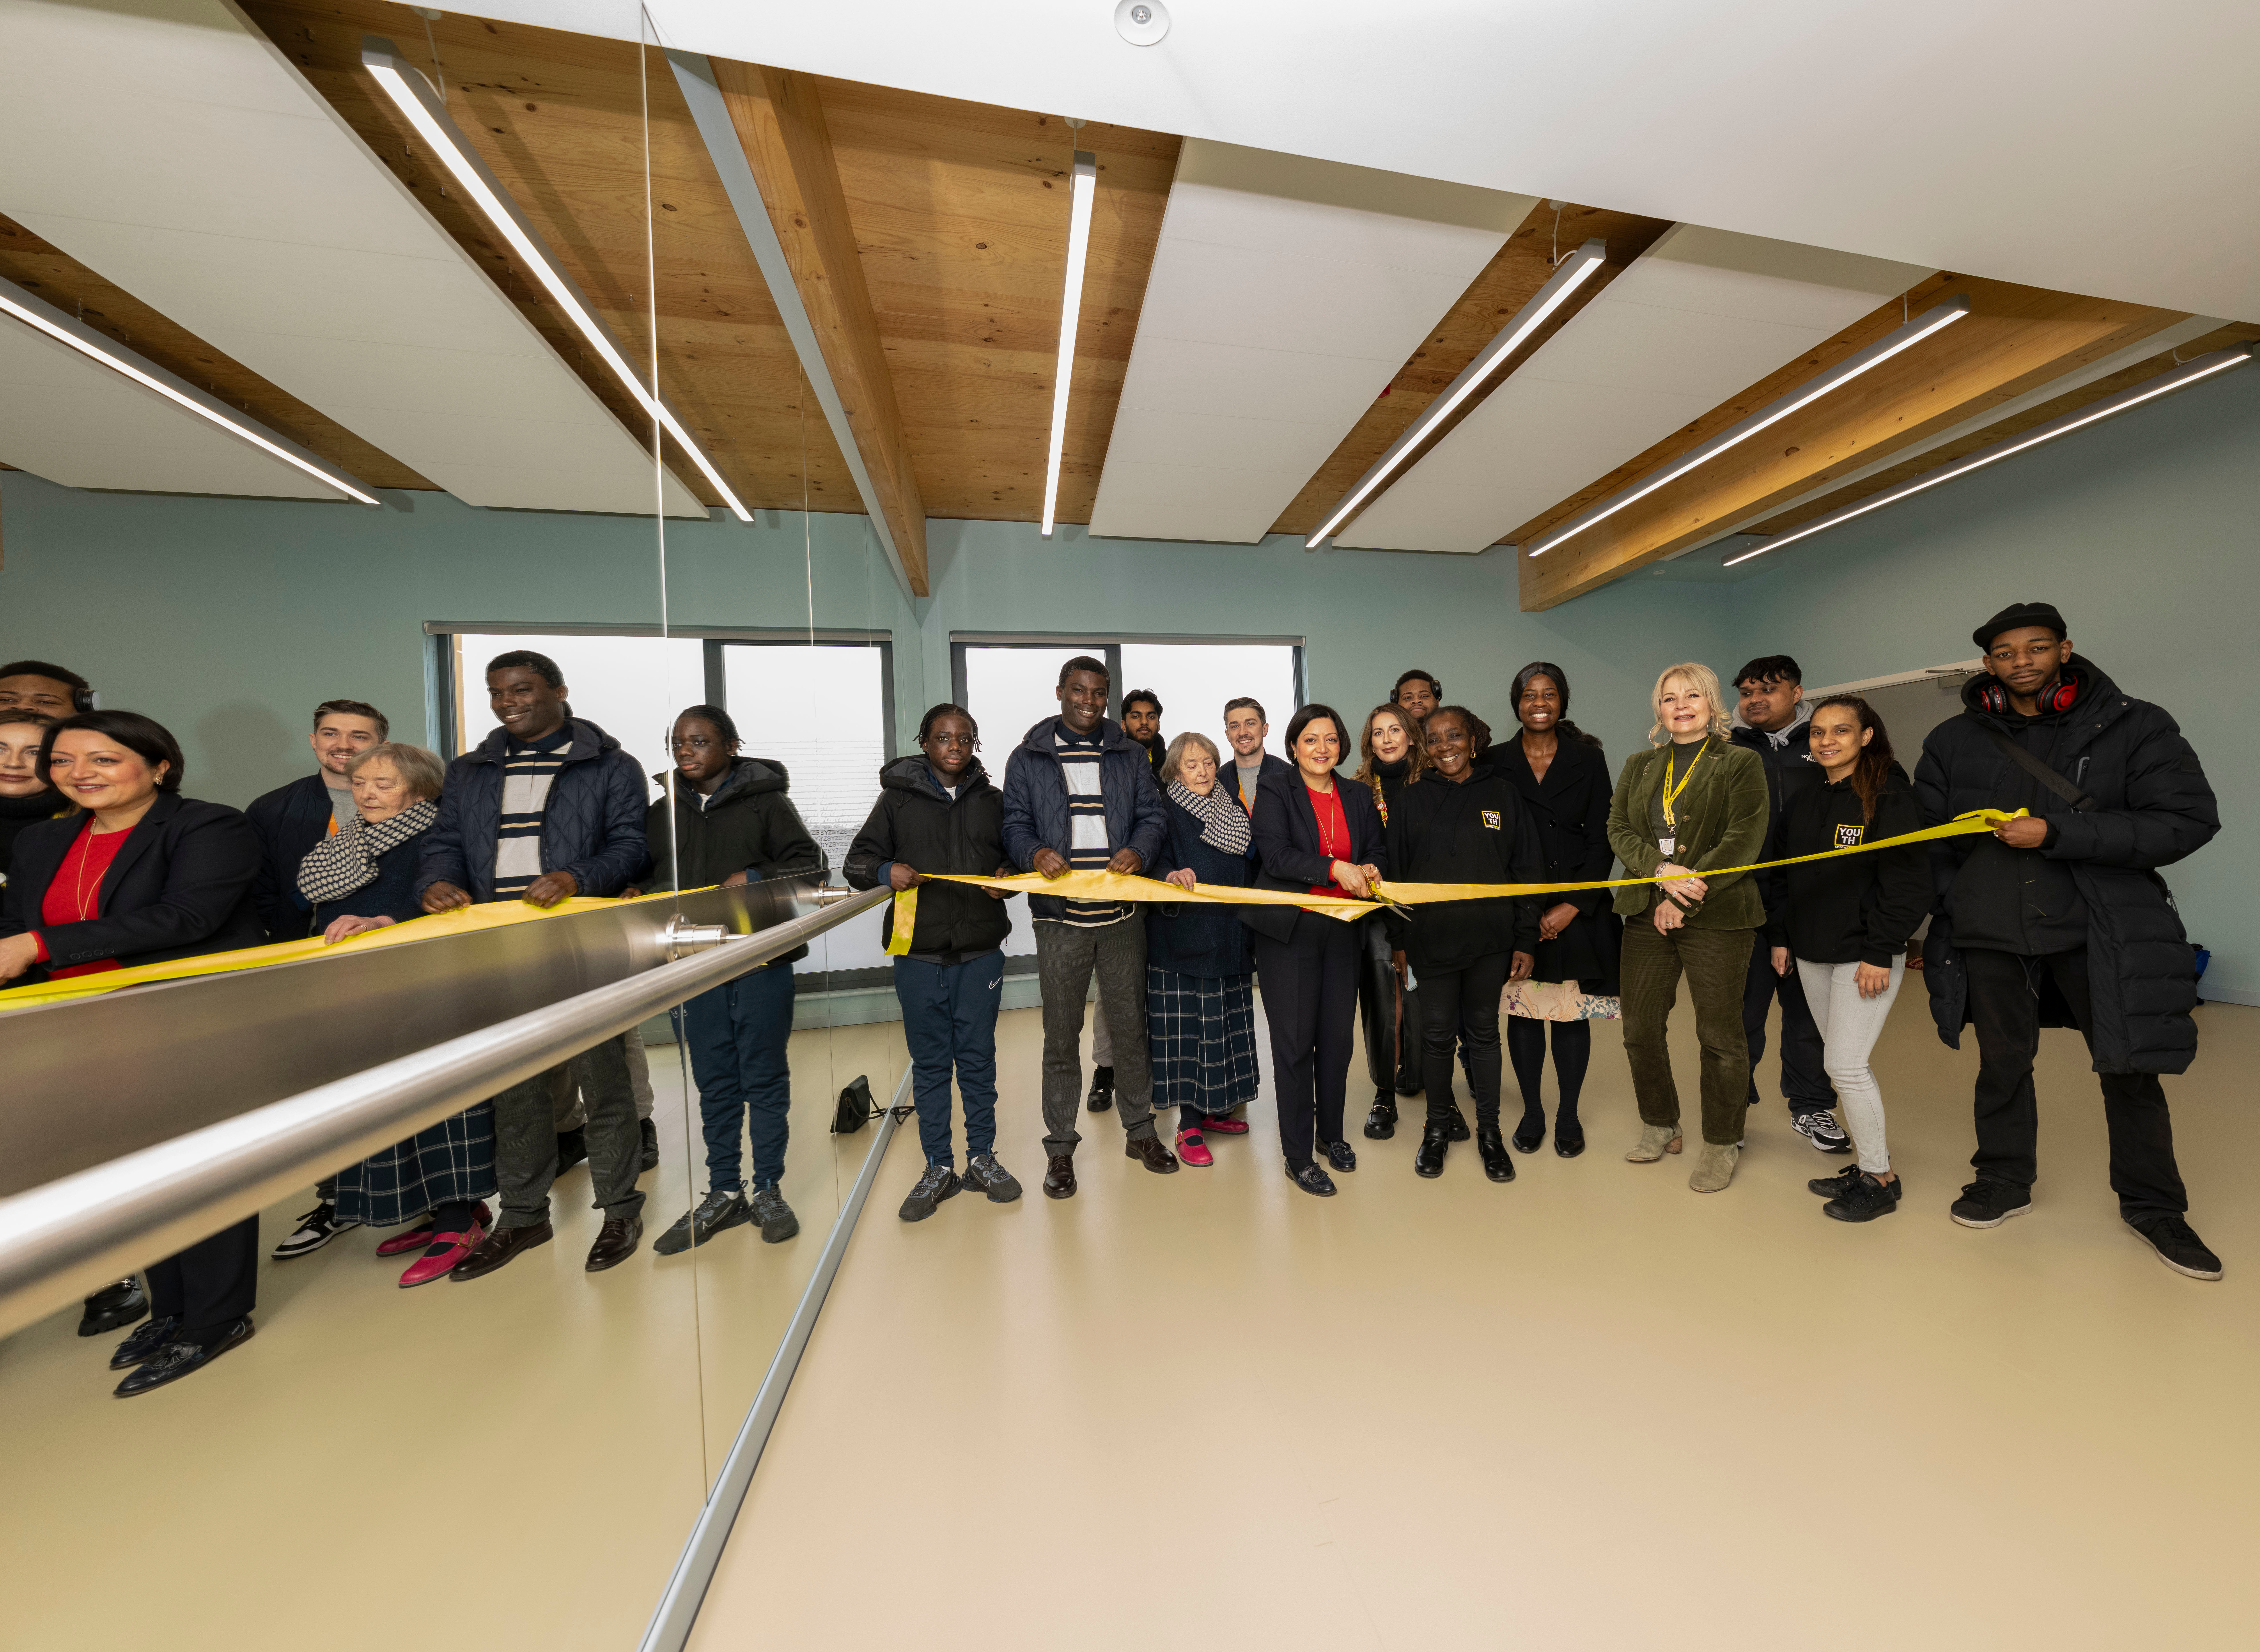 Mayor of Newham marks competition of work at &pound;8 million state-of-the-art shipman youth zone